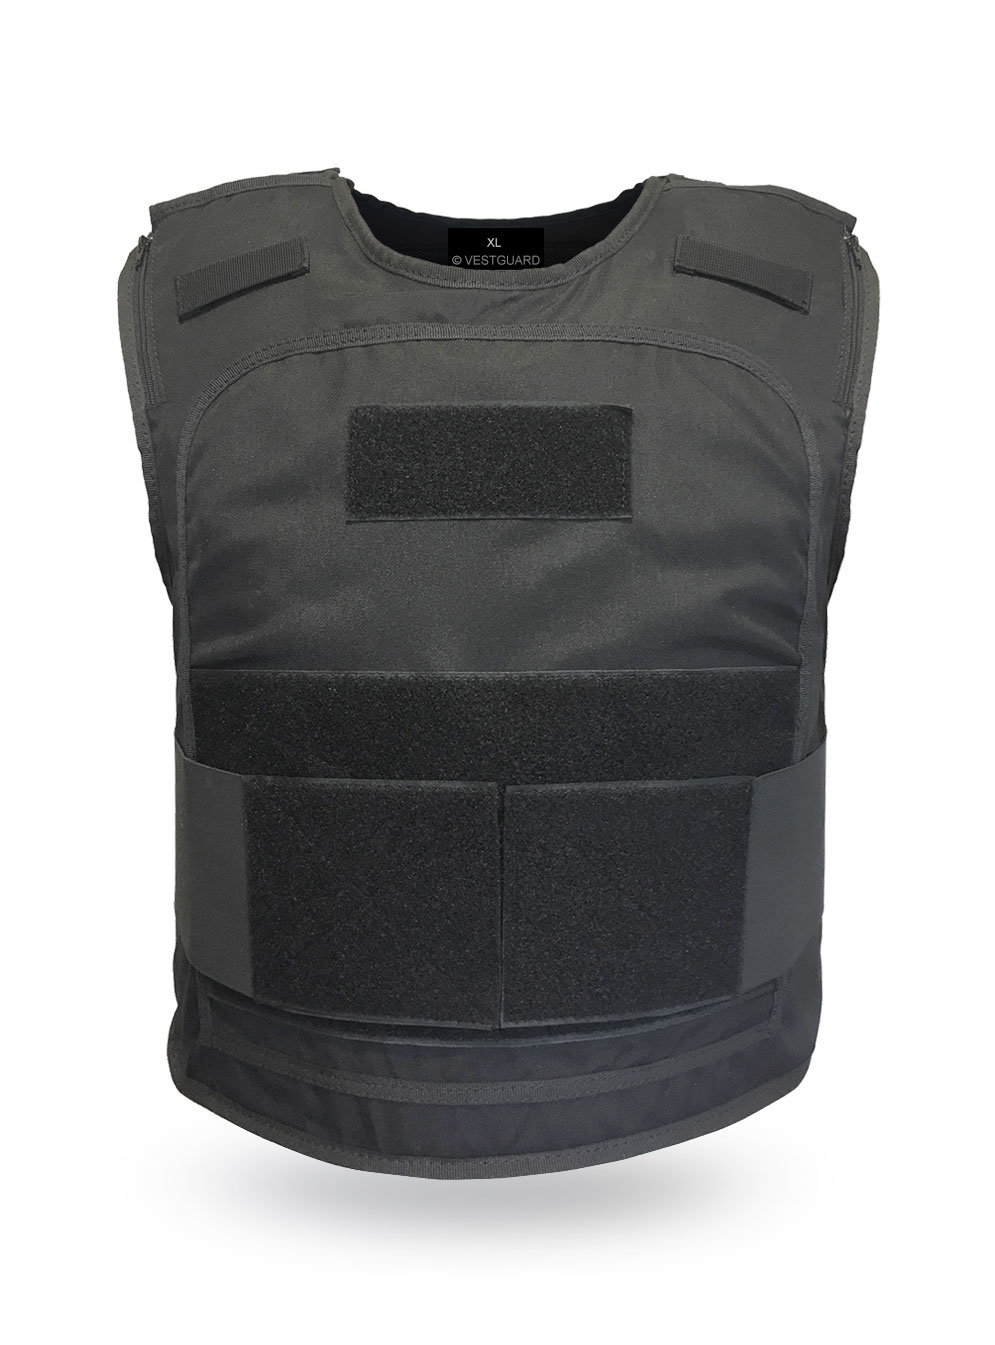 Global Security Body Armour (Rear View)